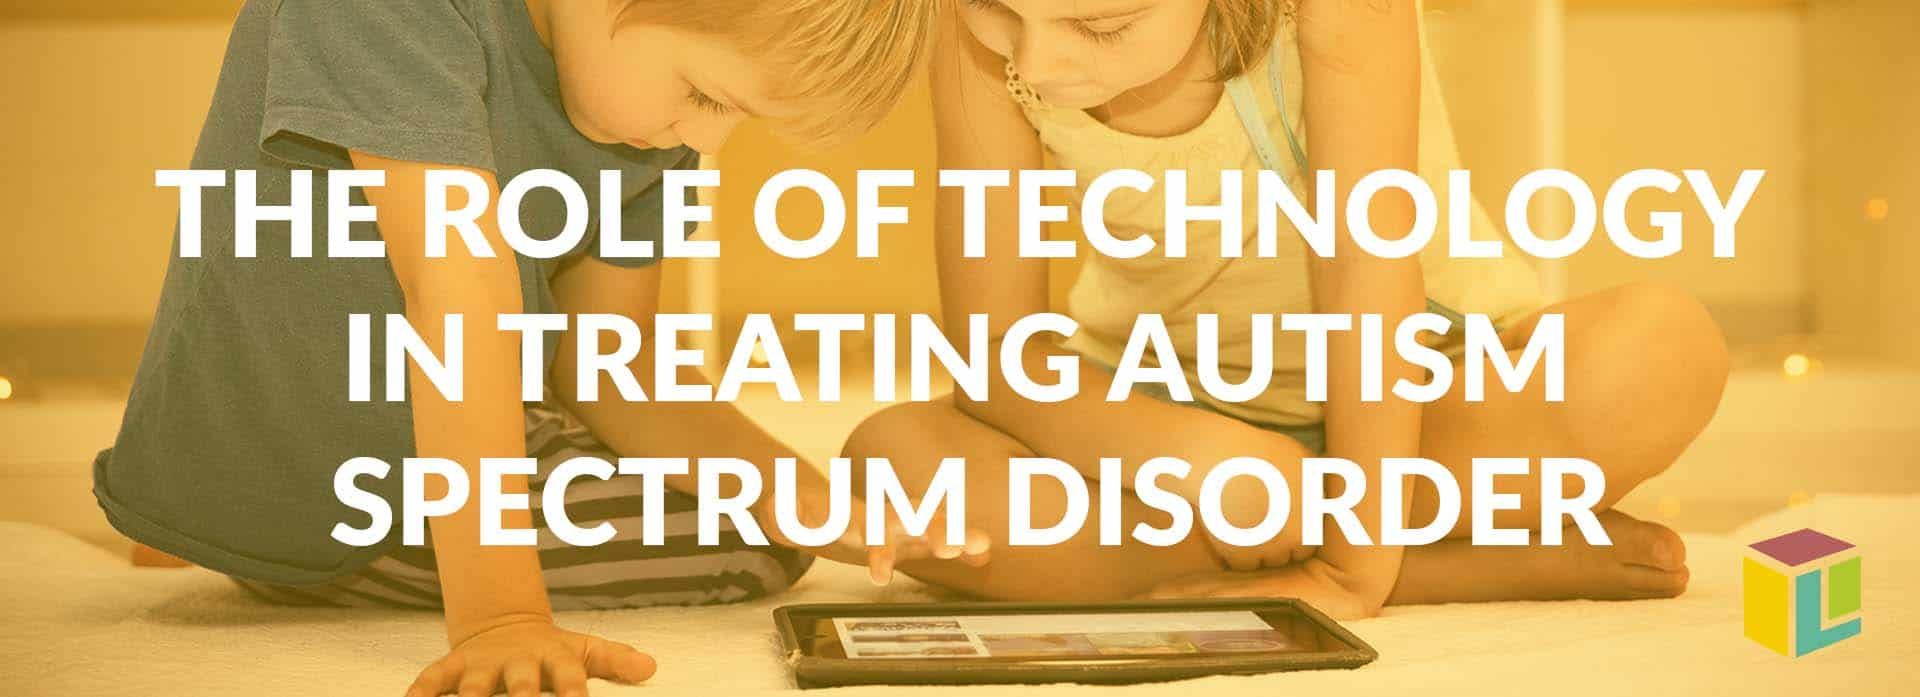 The Role Of Technology In Treating Autism The Role Of Technology In Treating Autism The Role Of Technology In Treating Autism The Role Of Technology In Treating Autism